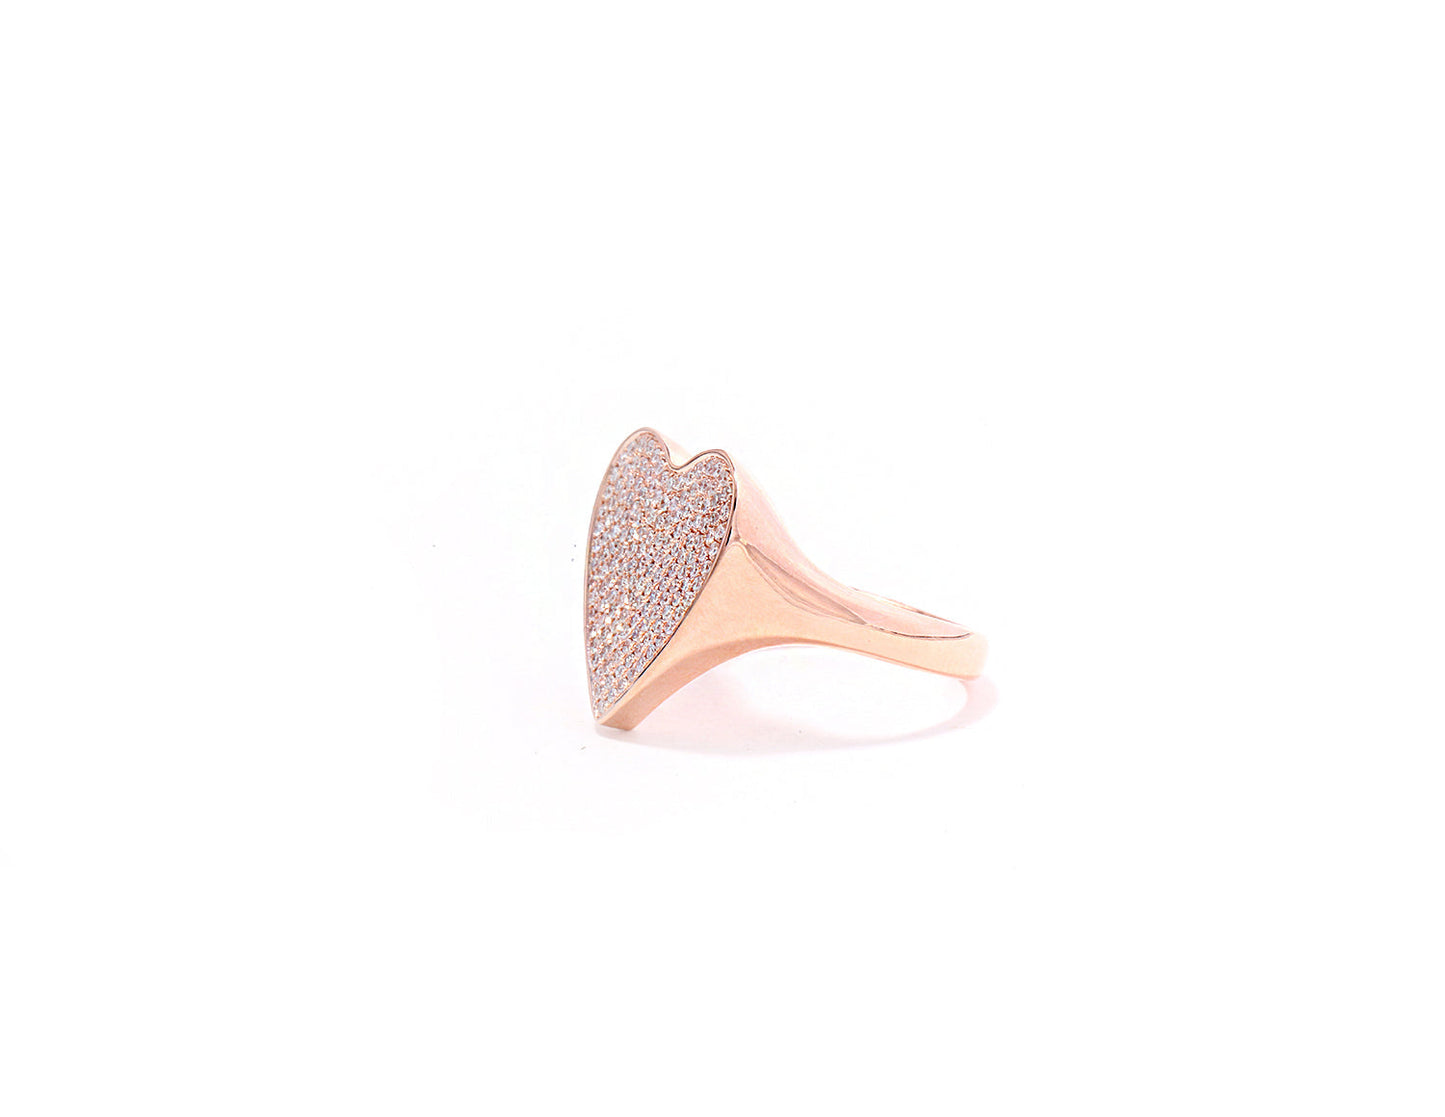 14k Rose Gold and Diamond Pave Heart Ring